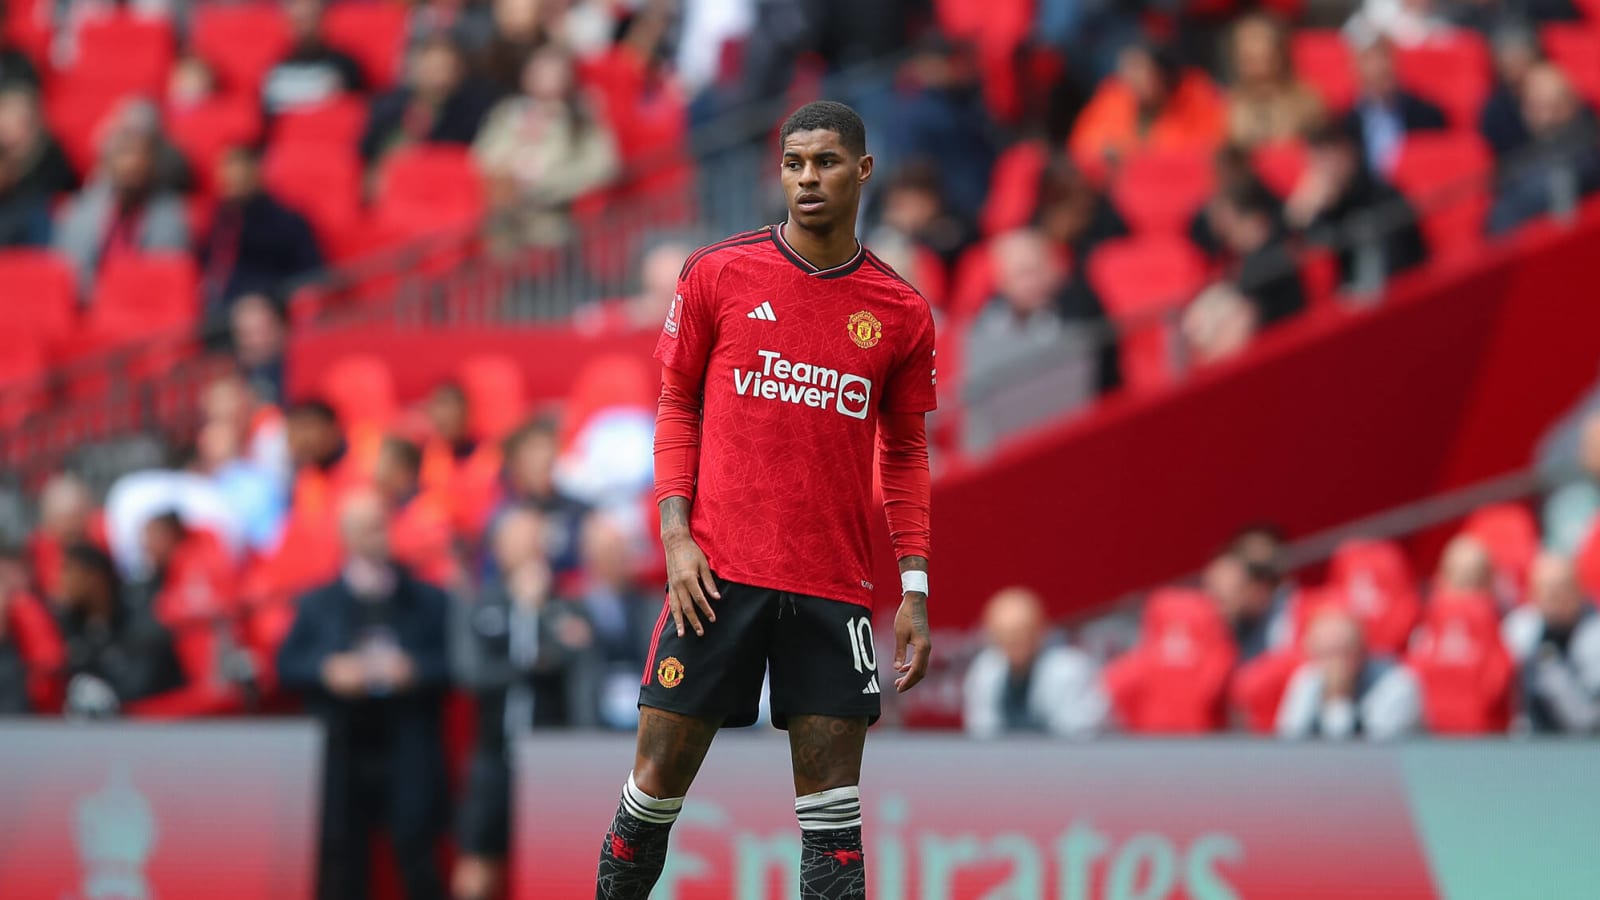 ‘That well has been polluted’ – Simon Jordan advises Marcus Rashford to leave United